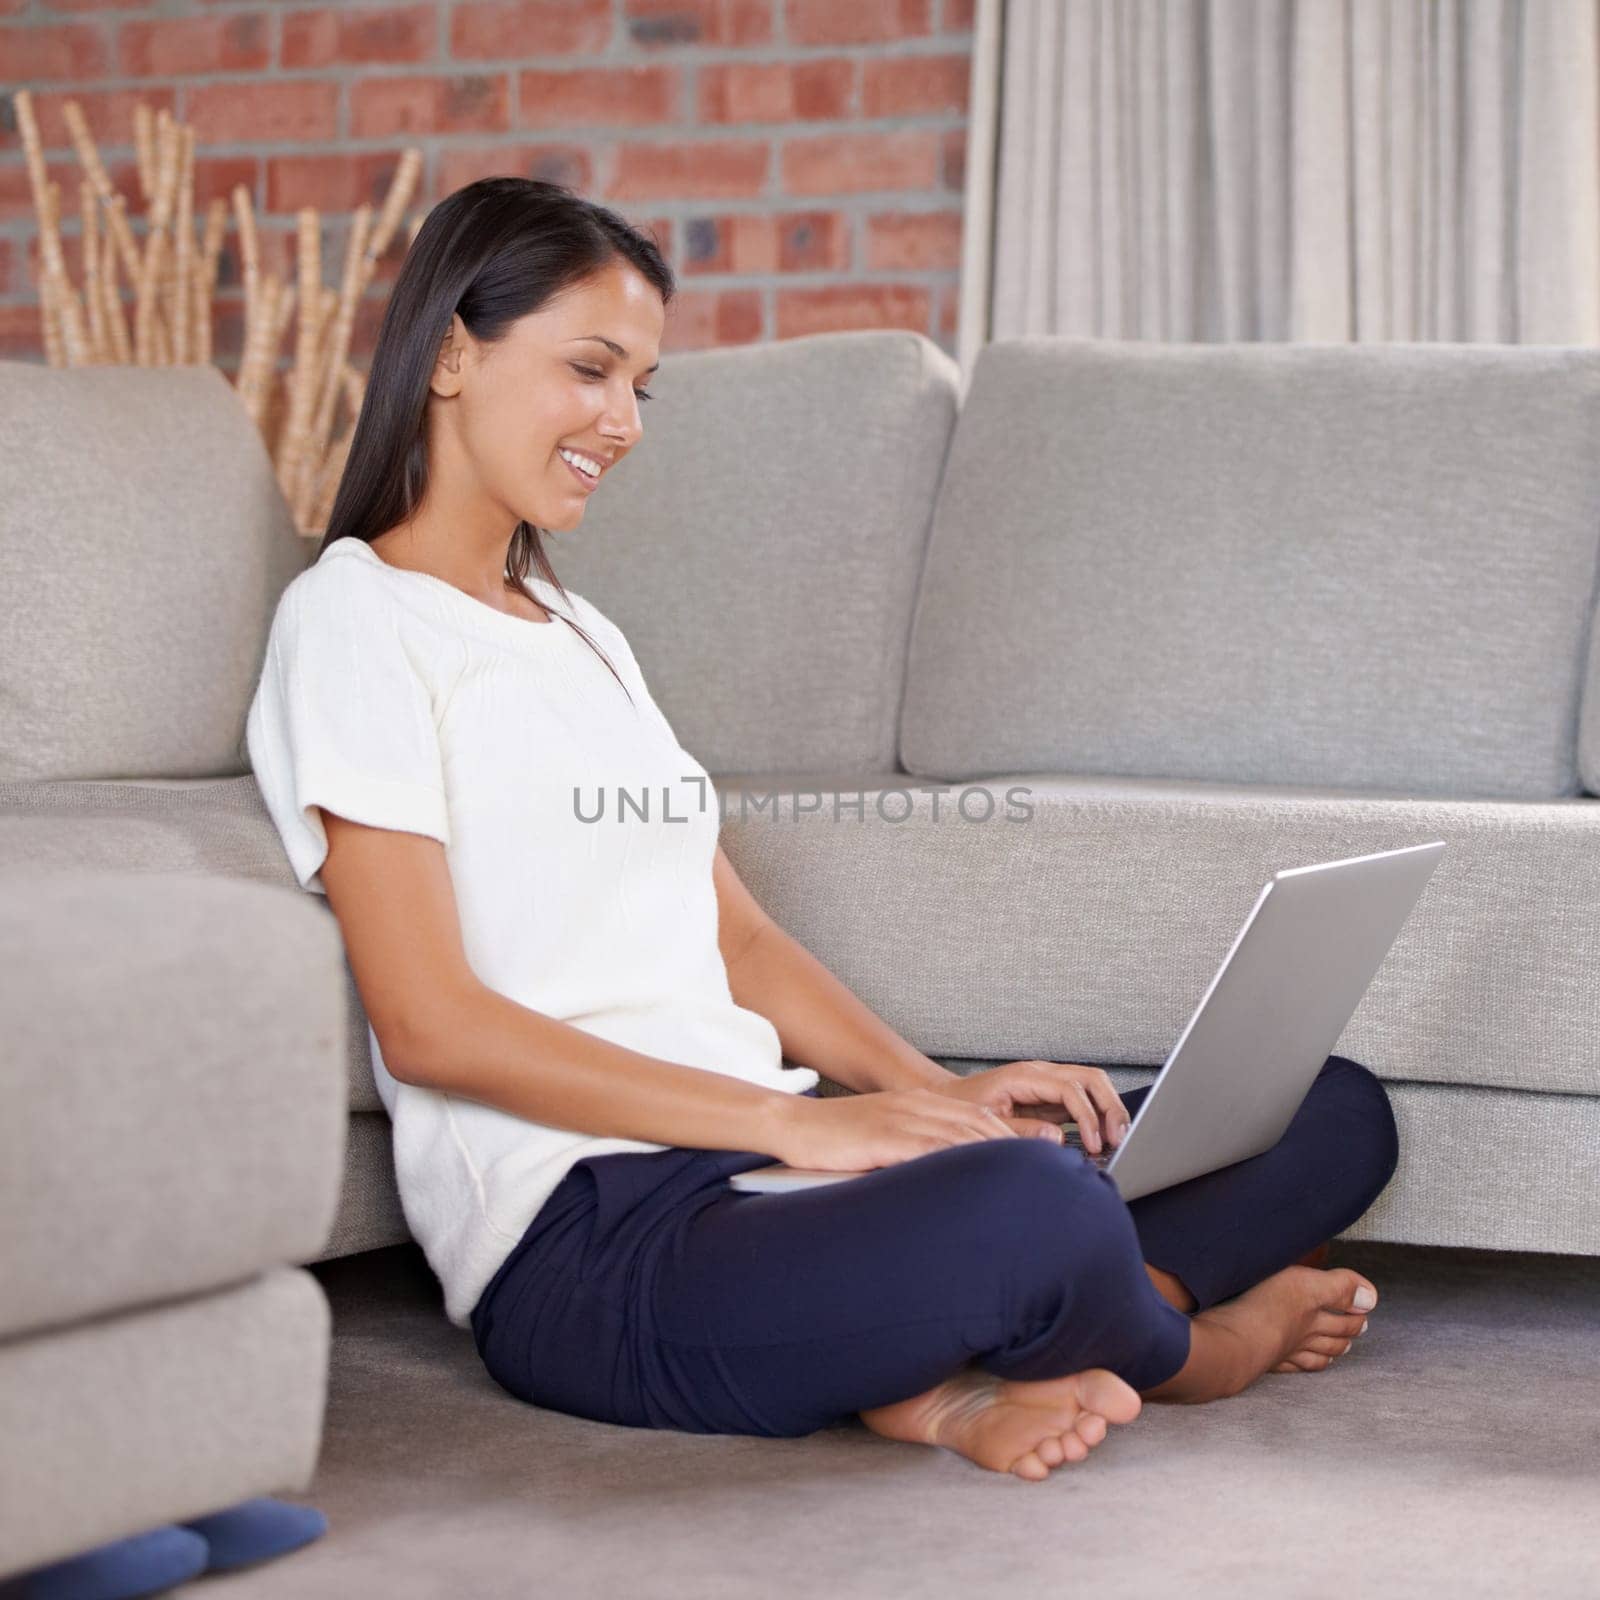 Laptop, smile and a woman typing online in home lounge while streaming online. Happy female person relax on floor for remote work, studying and research or email with internet connection in a house.